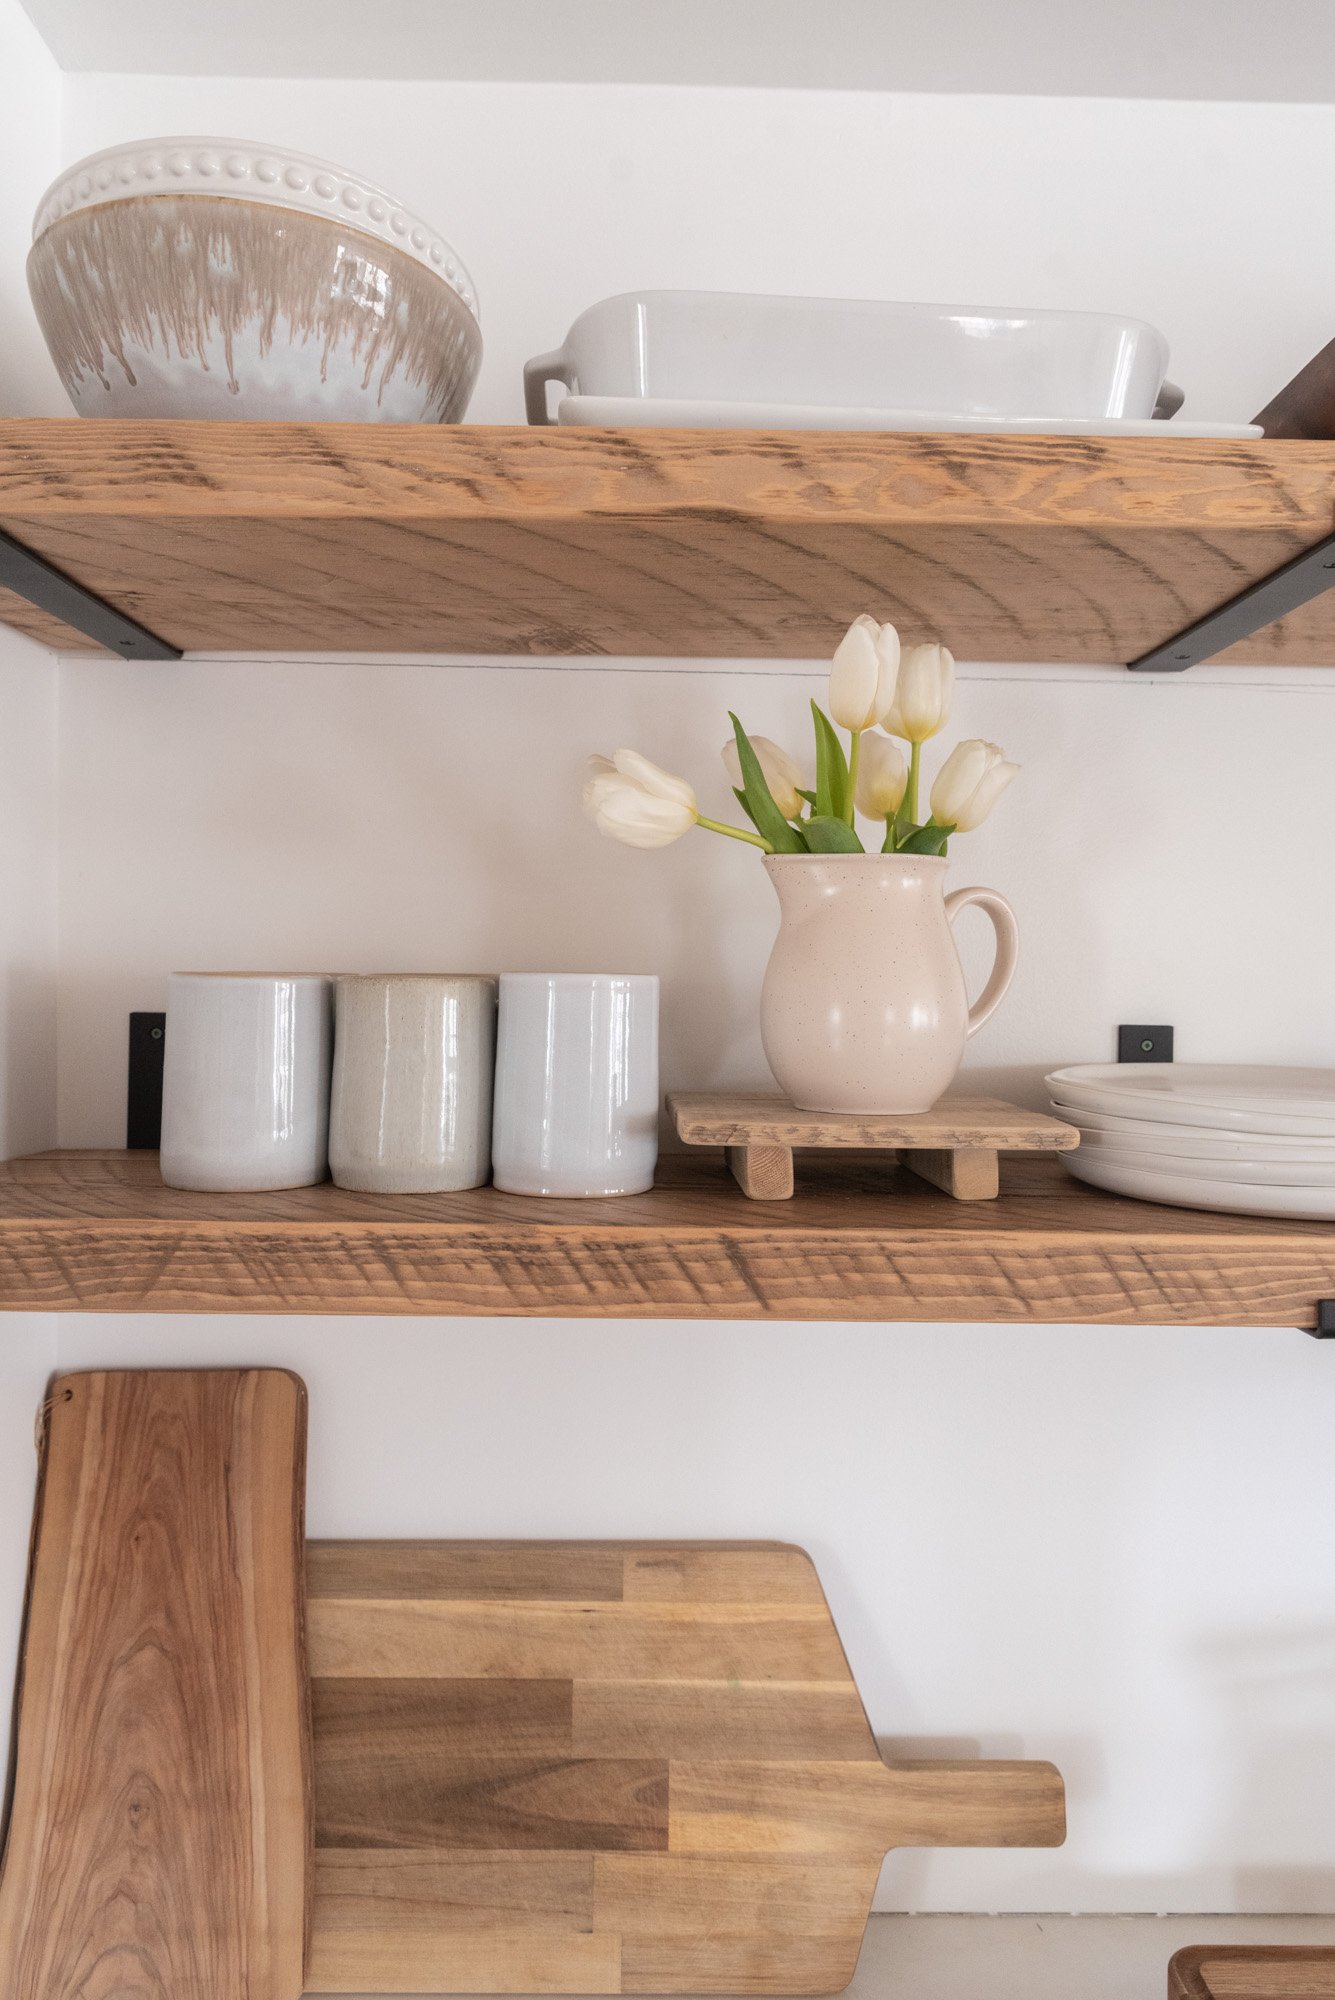 The Wild Decoelis | Kitchen shelves rough sawn with black iron brackets minimal reclaimed wood and white ceramics. tulips on stand